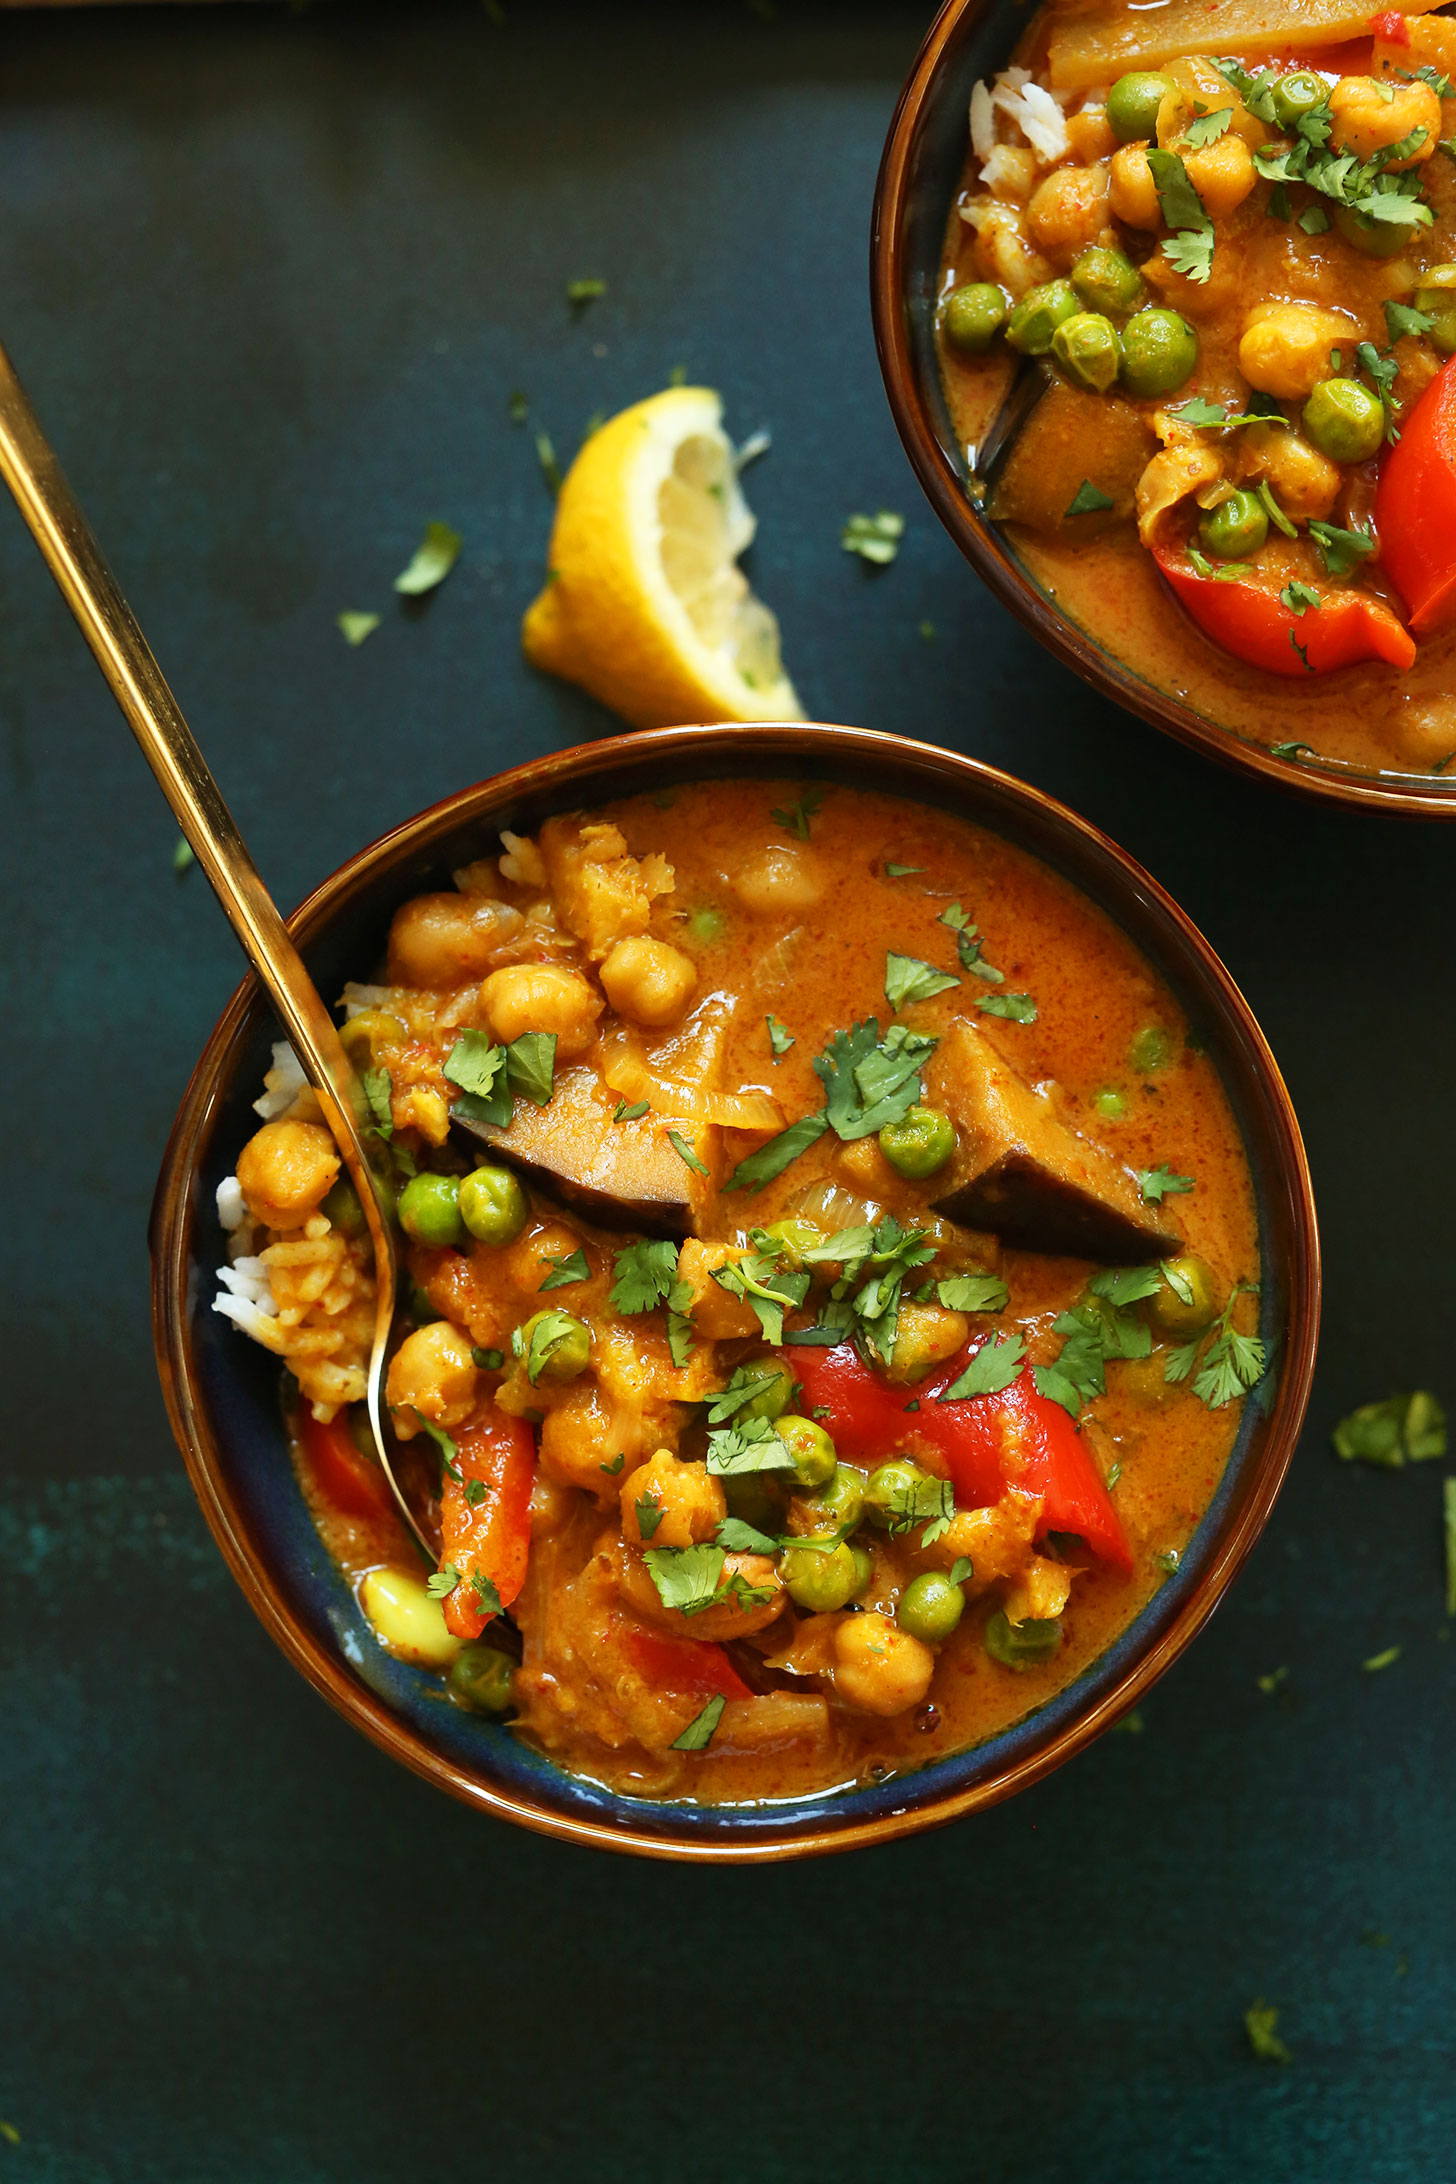 Red-vegetable-coconut-curry-with-chickpeas-1-pot-simple-so-flavorful-vegan-glutenfree-plantbased-curry-recipe-chickpeas